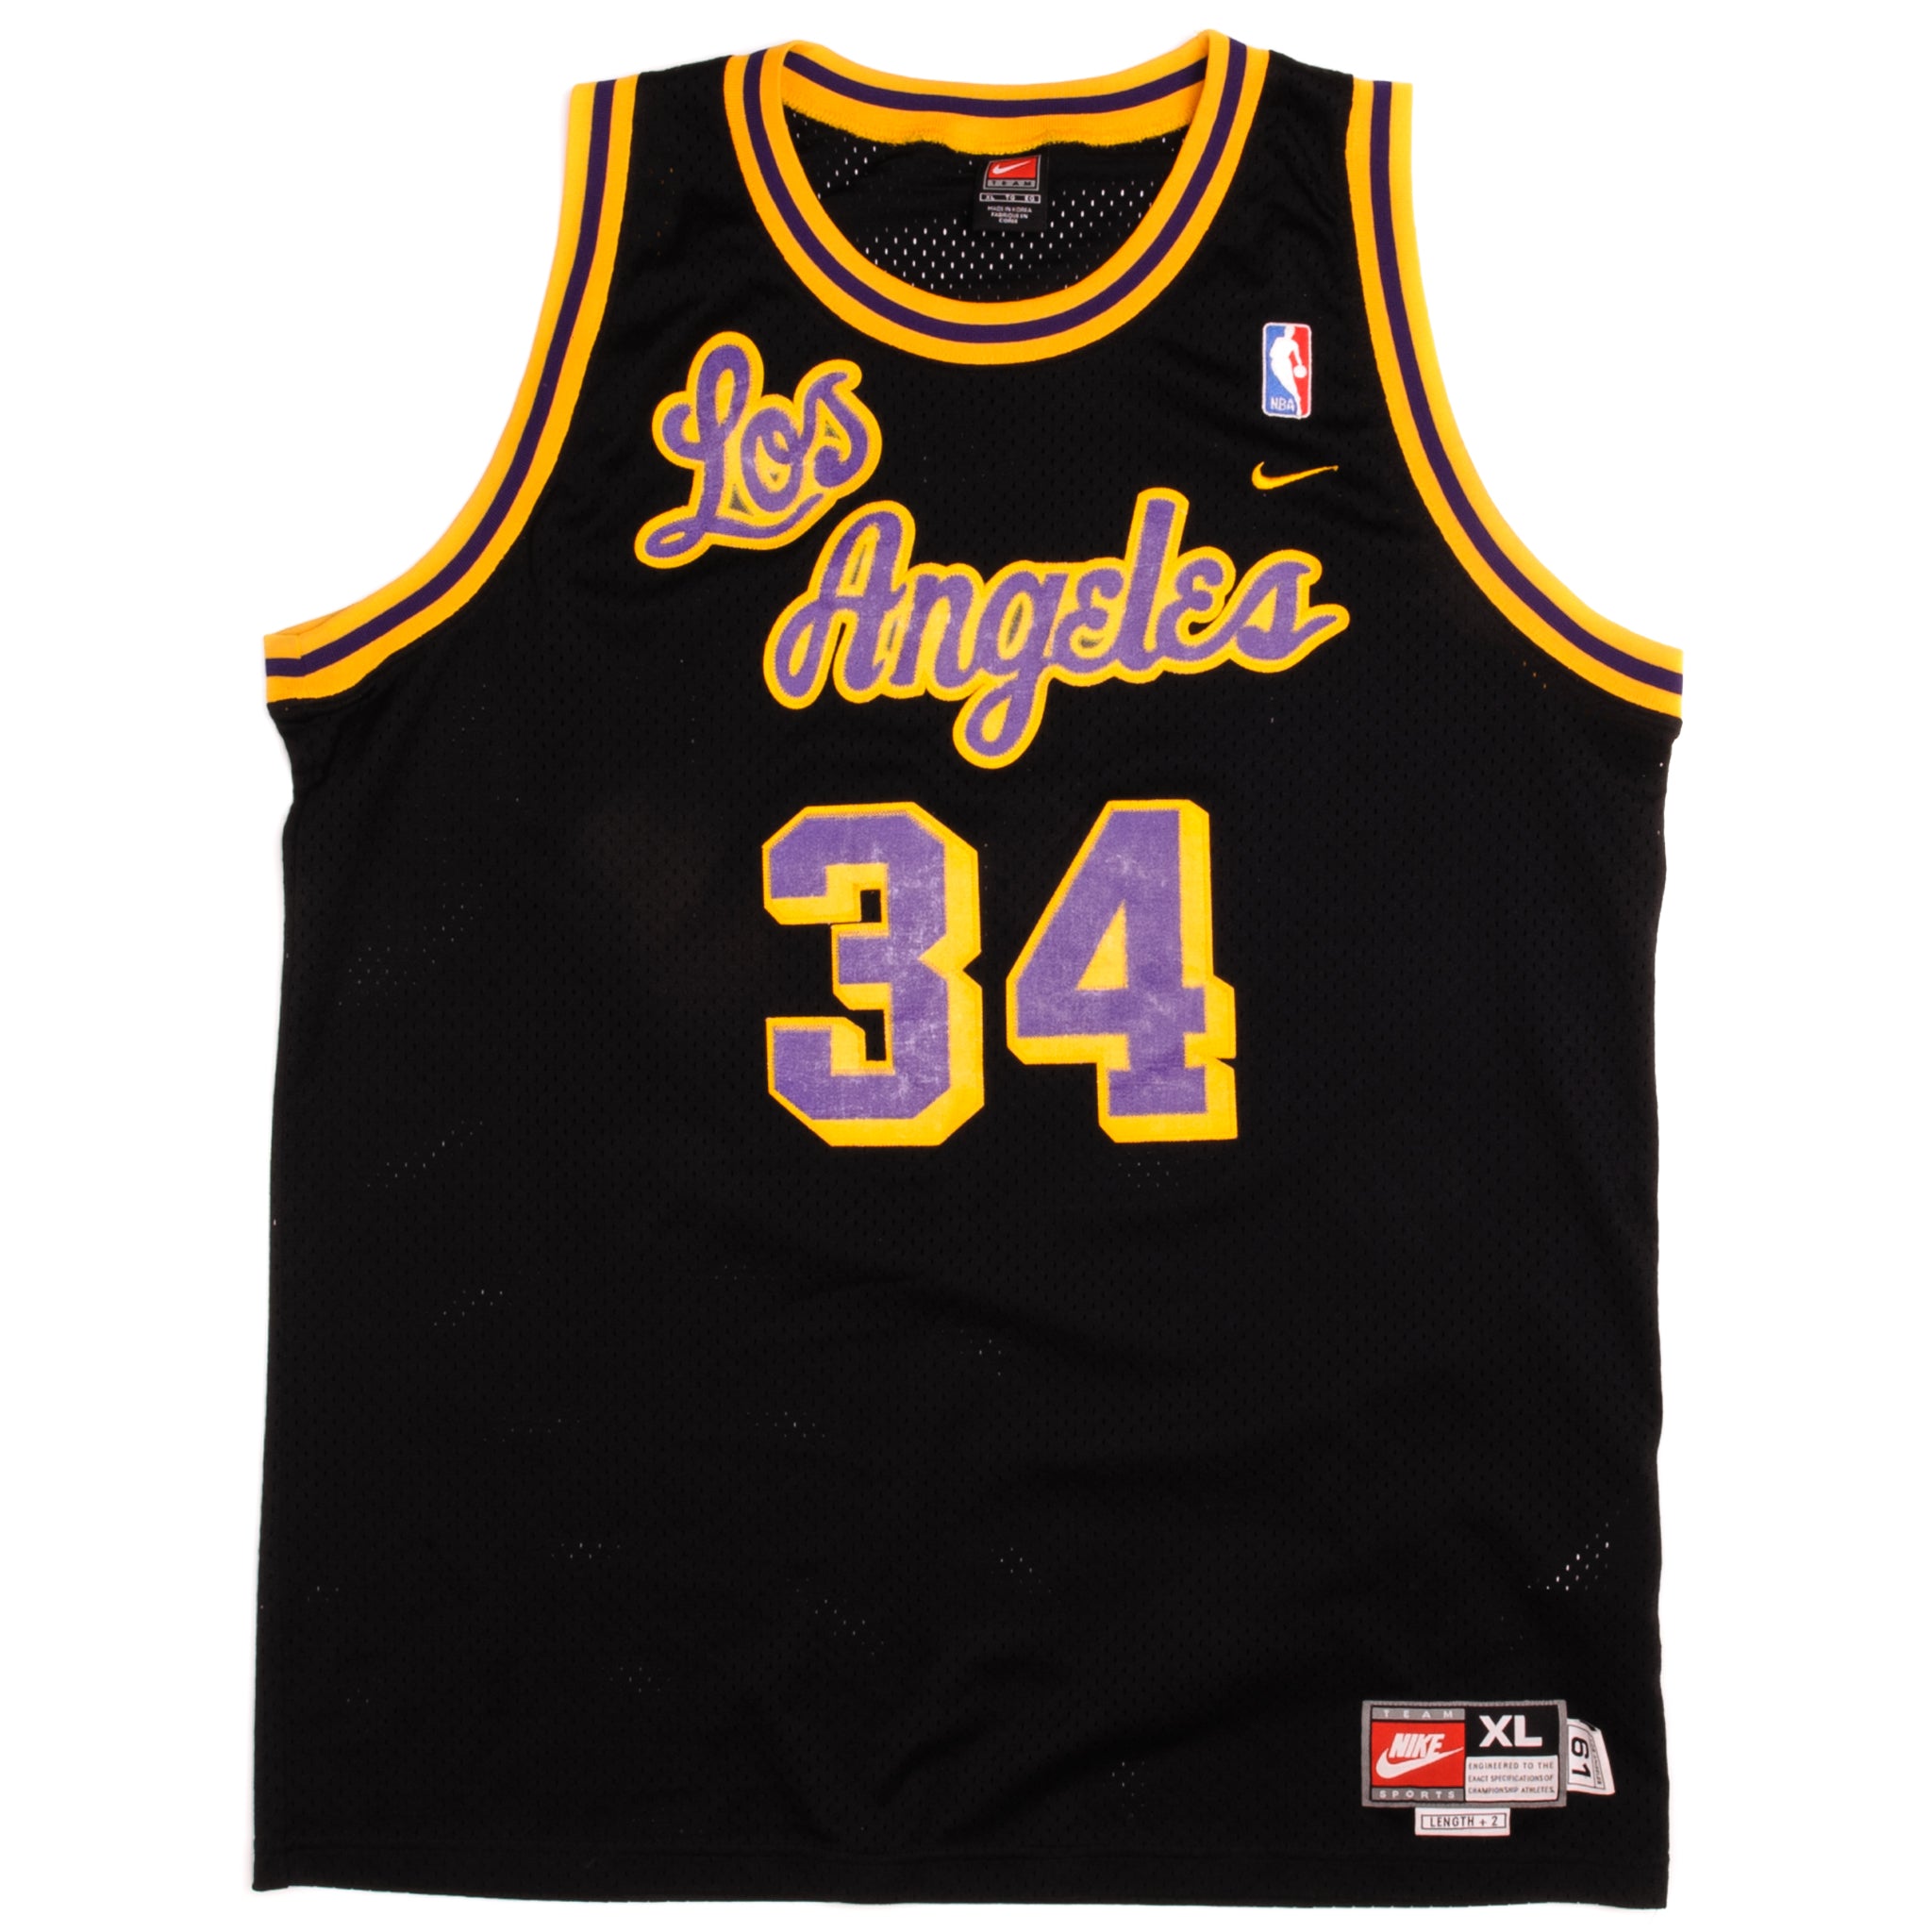 shaquille o'neal lakers jersey